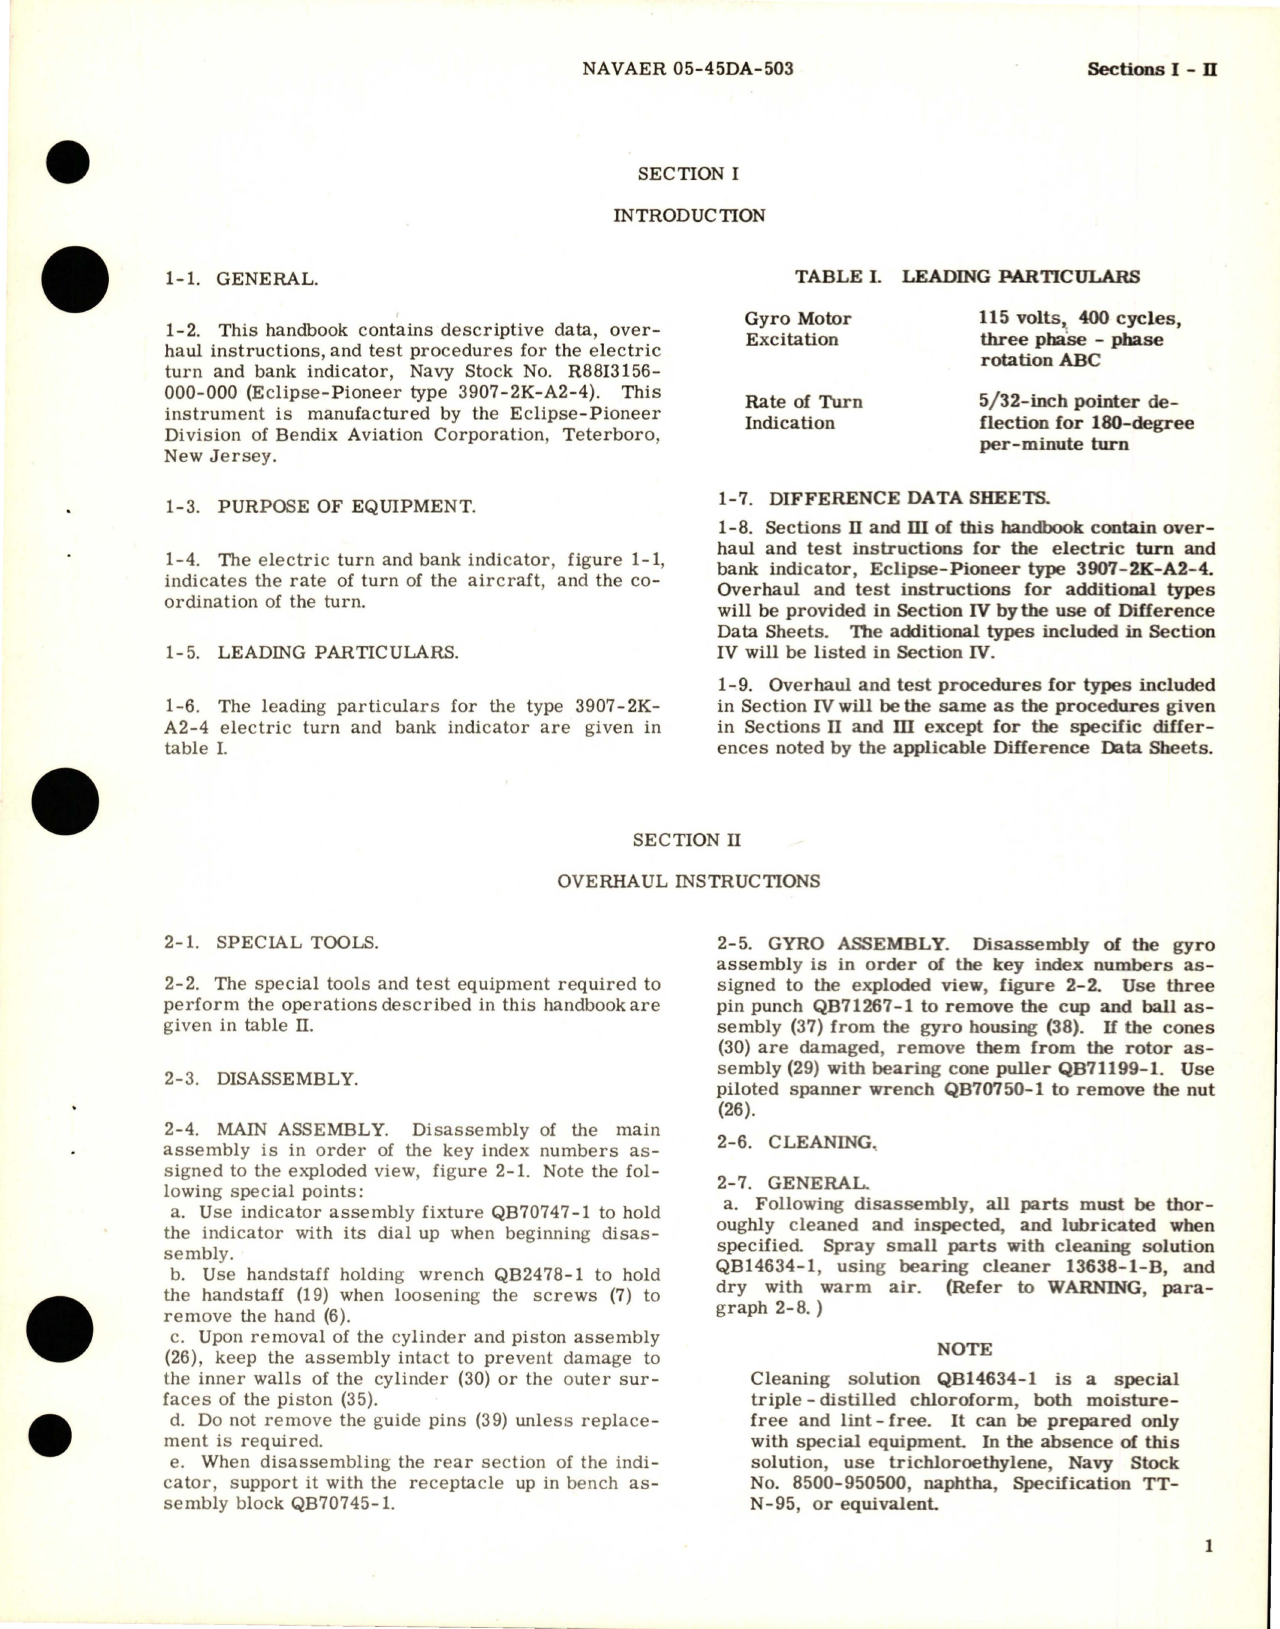 Sample page 5 from AirCorps Library document: Overhaul Instructions for Electric Turn and Bank Indicator - Part 3907-2K-A2-4